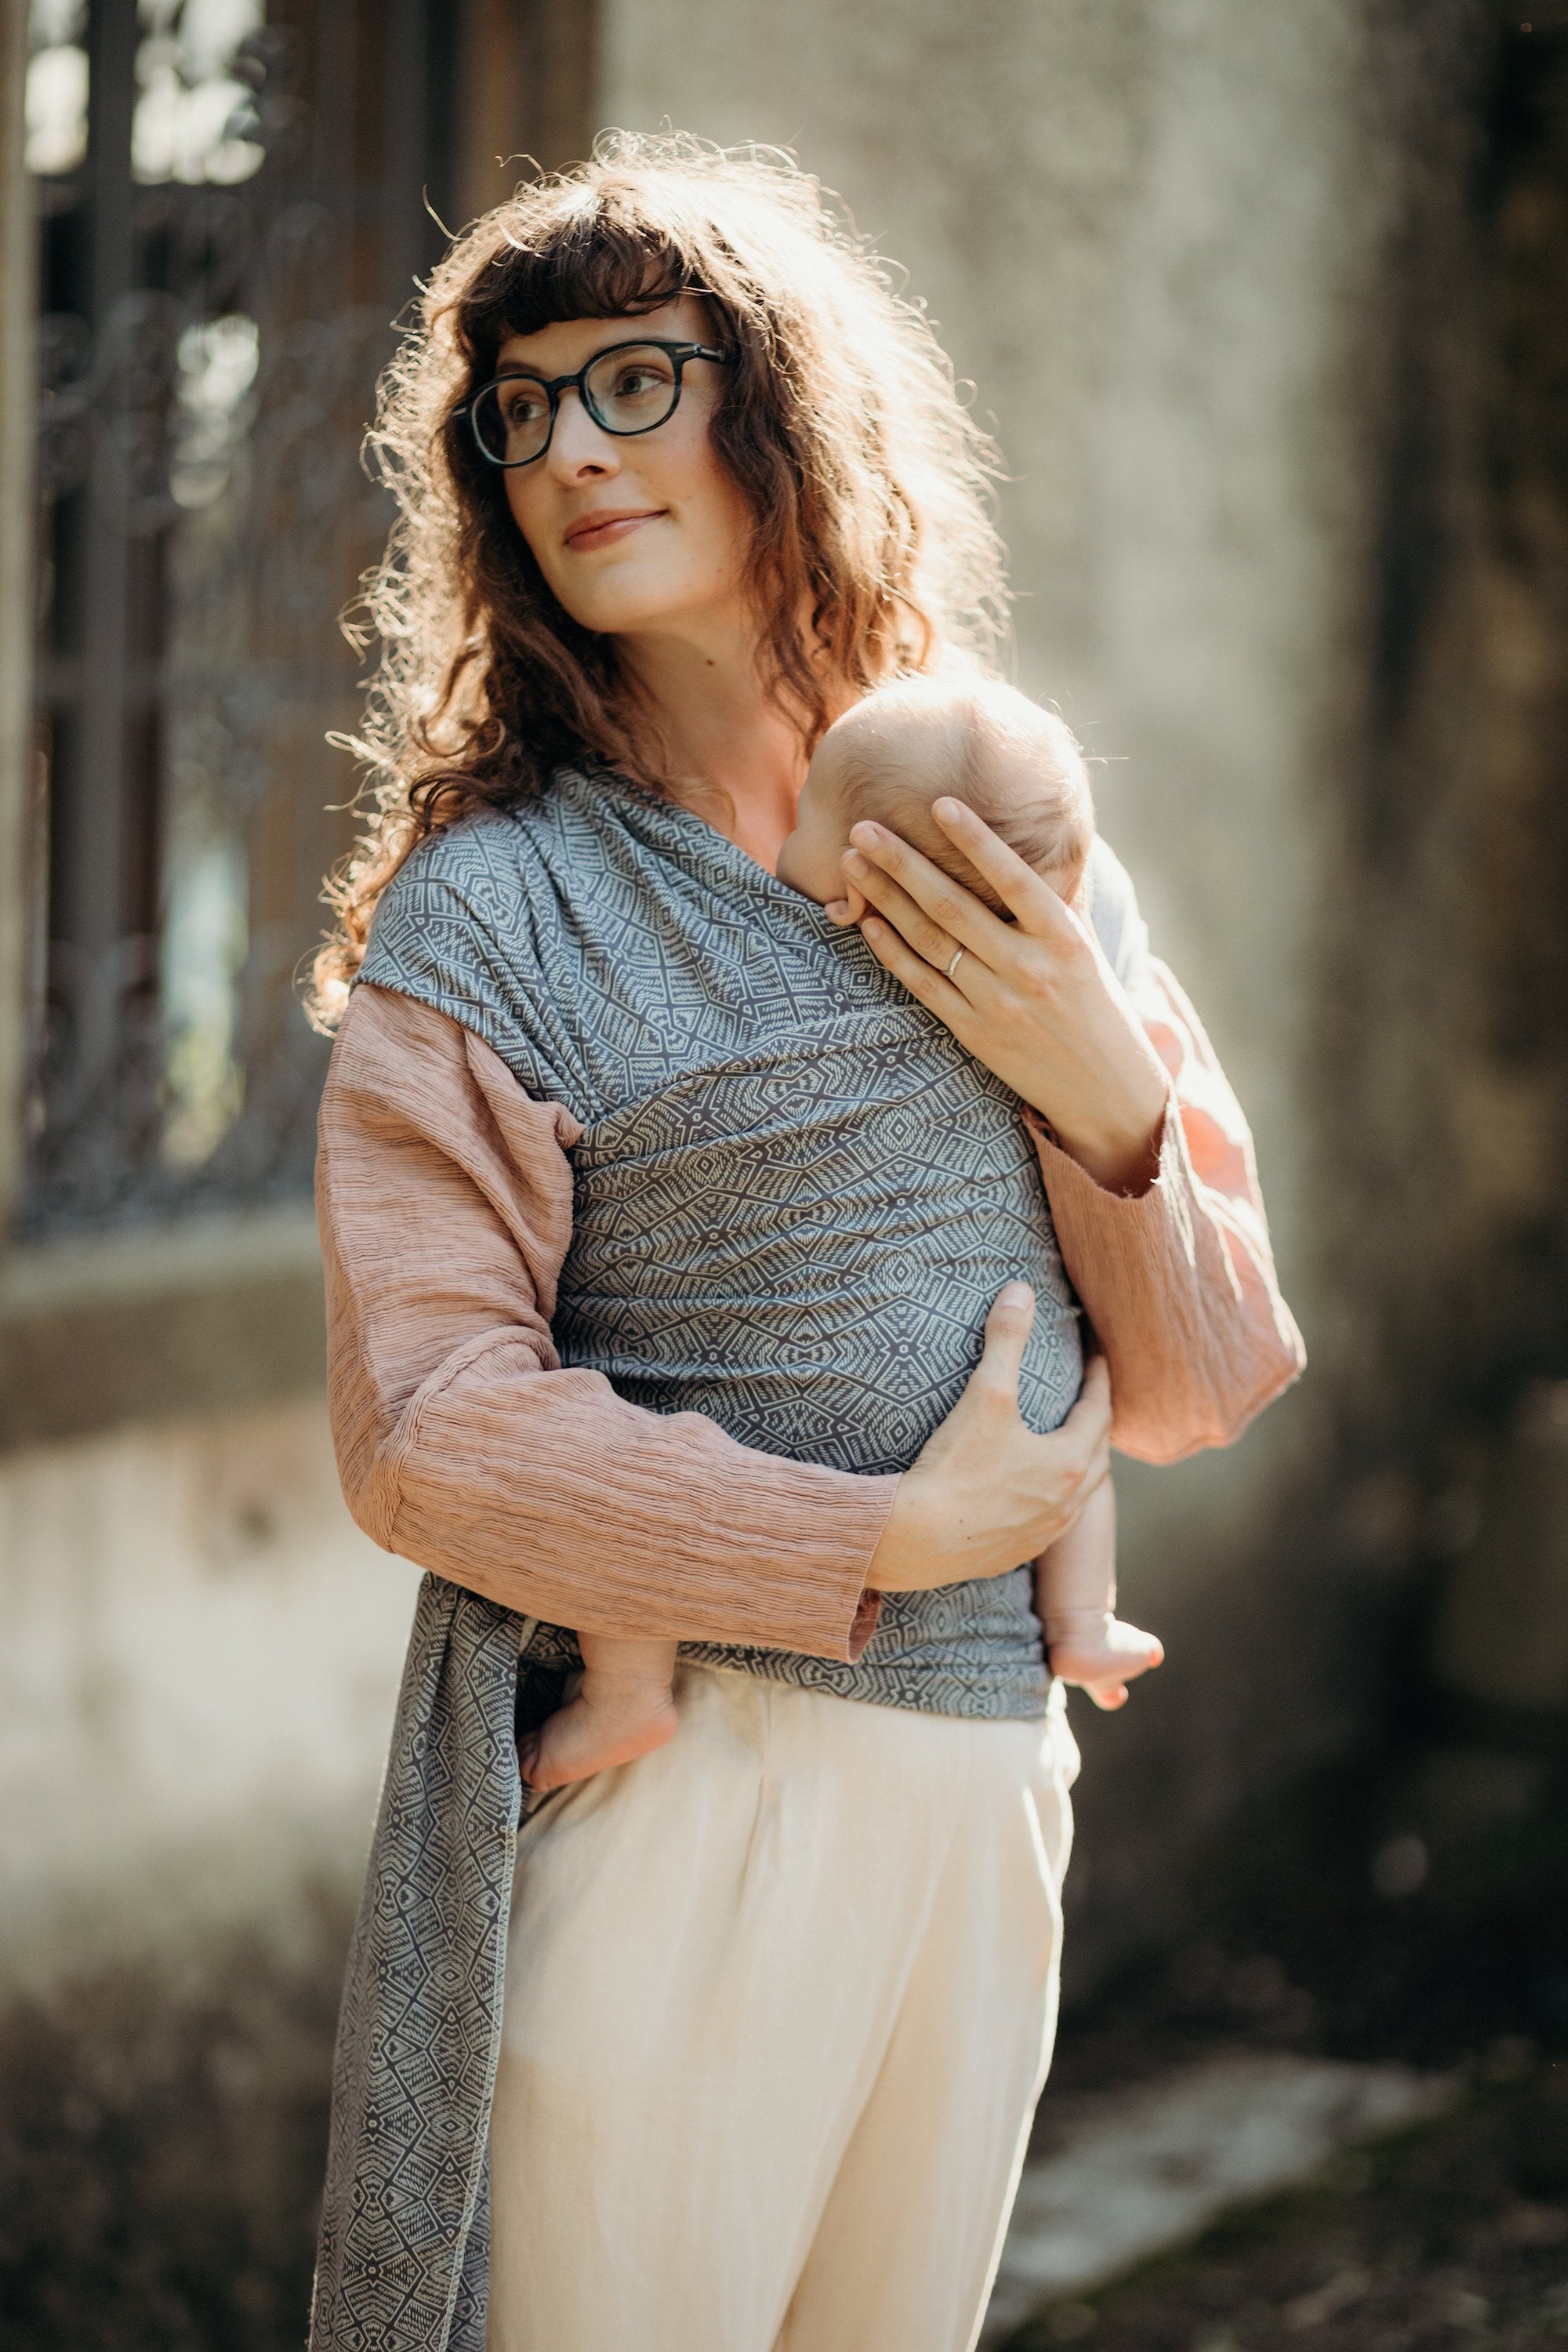 Keep your baby cozy and comfortable wherever you go with Boba's Classic Wrap Kahla! Made of a 95% French Terry cotton blend and ergonomically designed, this one-size-fits-all wrap provides maximum comfort for parents and is certified hip-healthy for your little one.